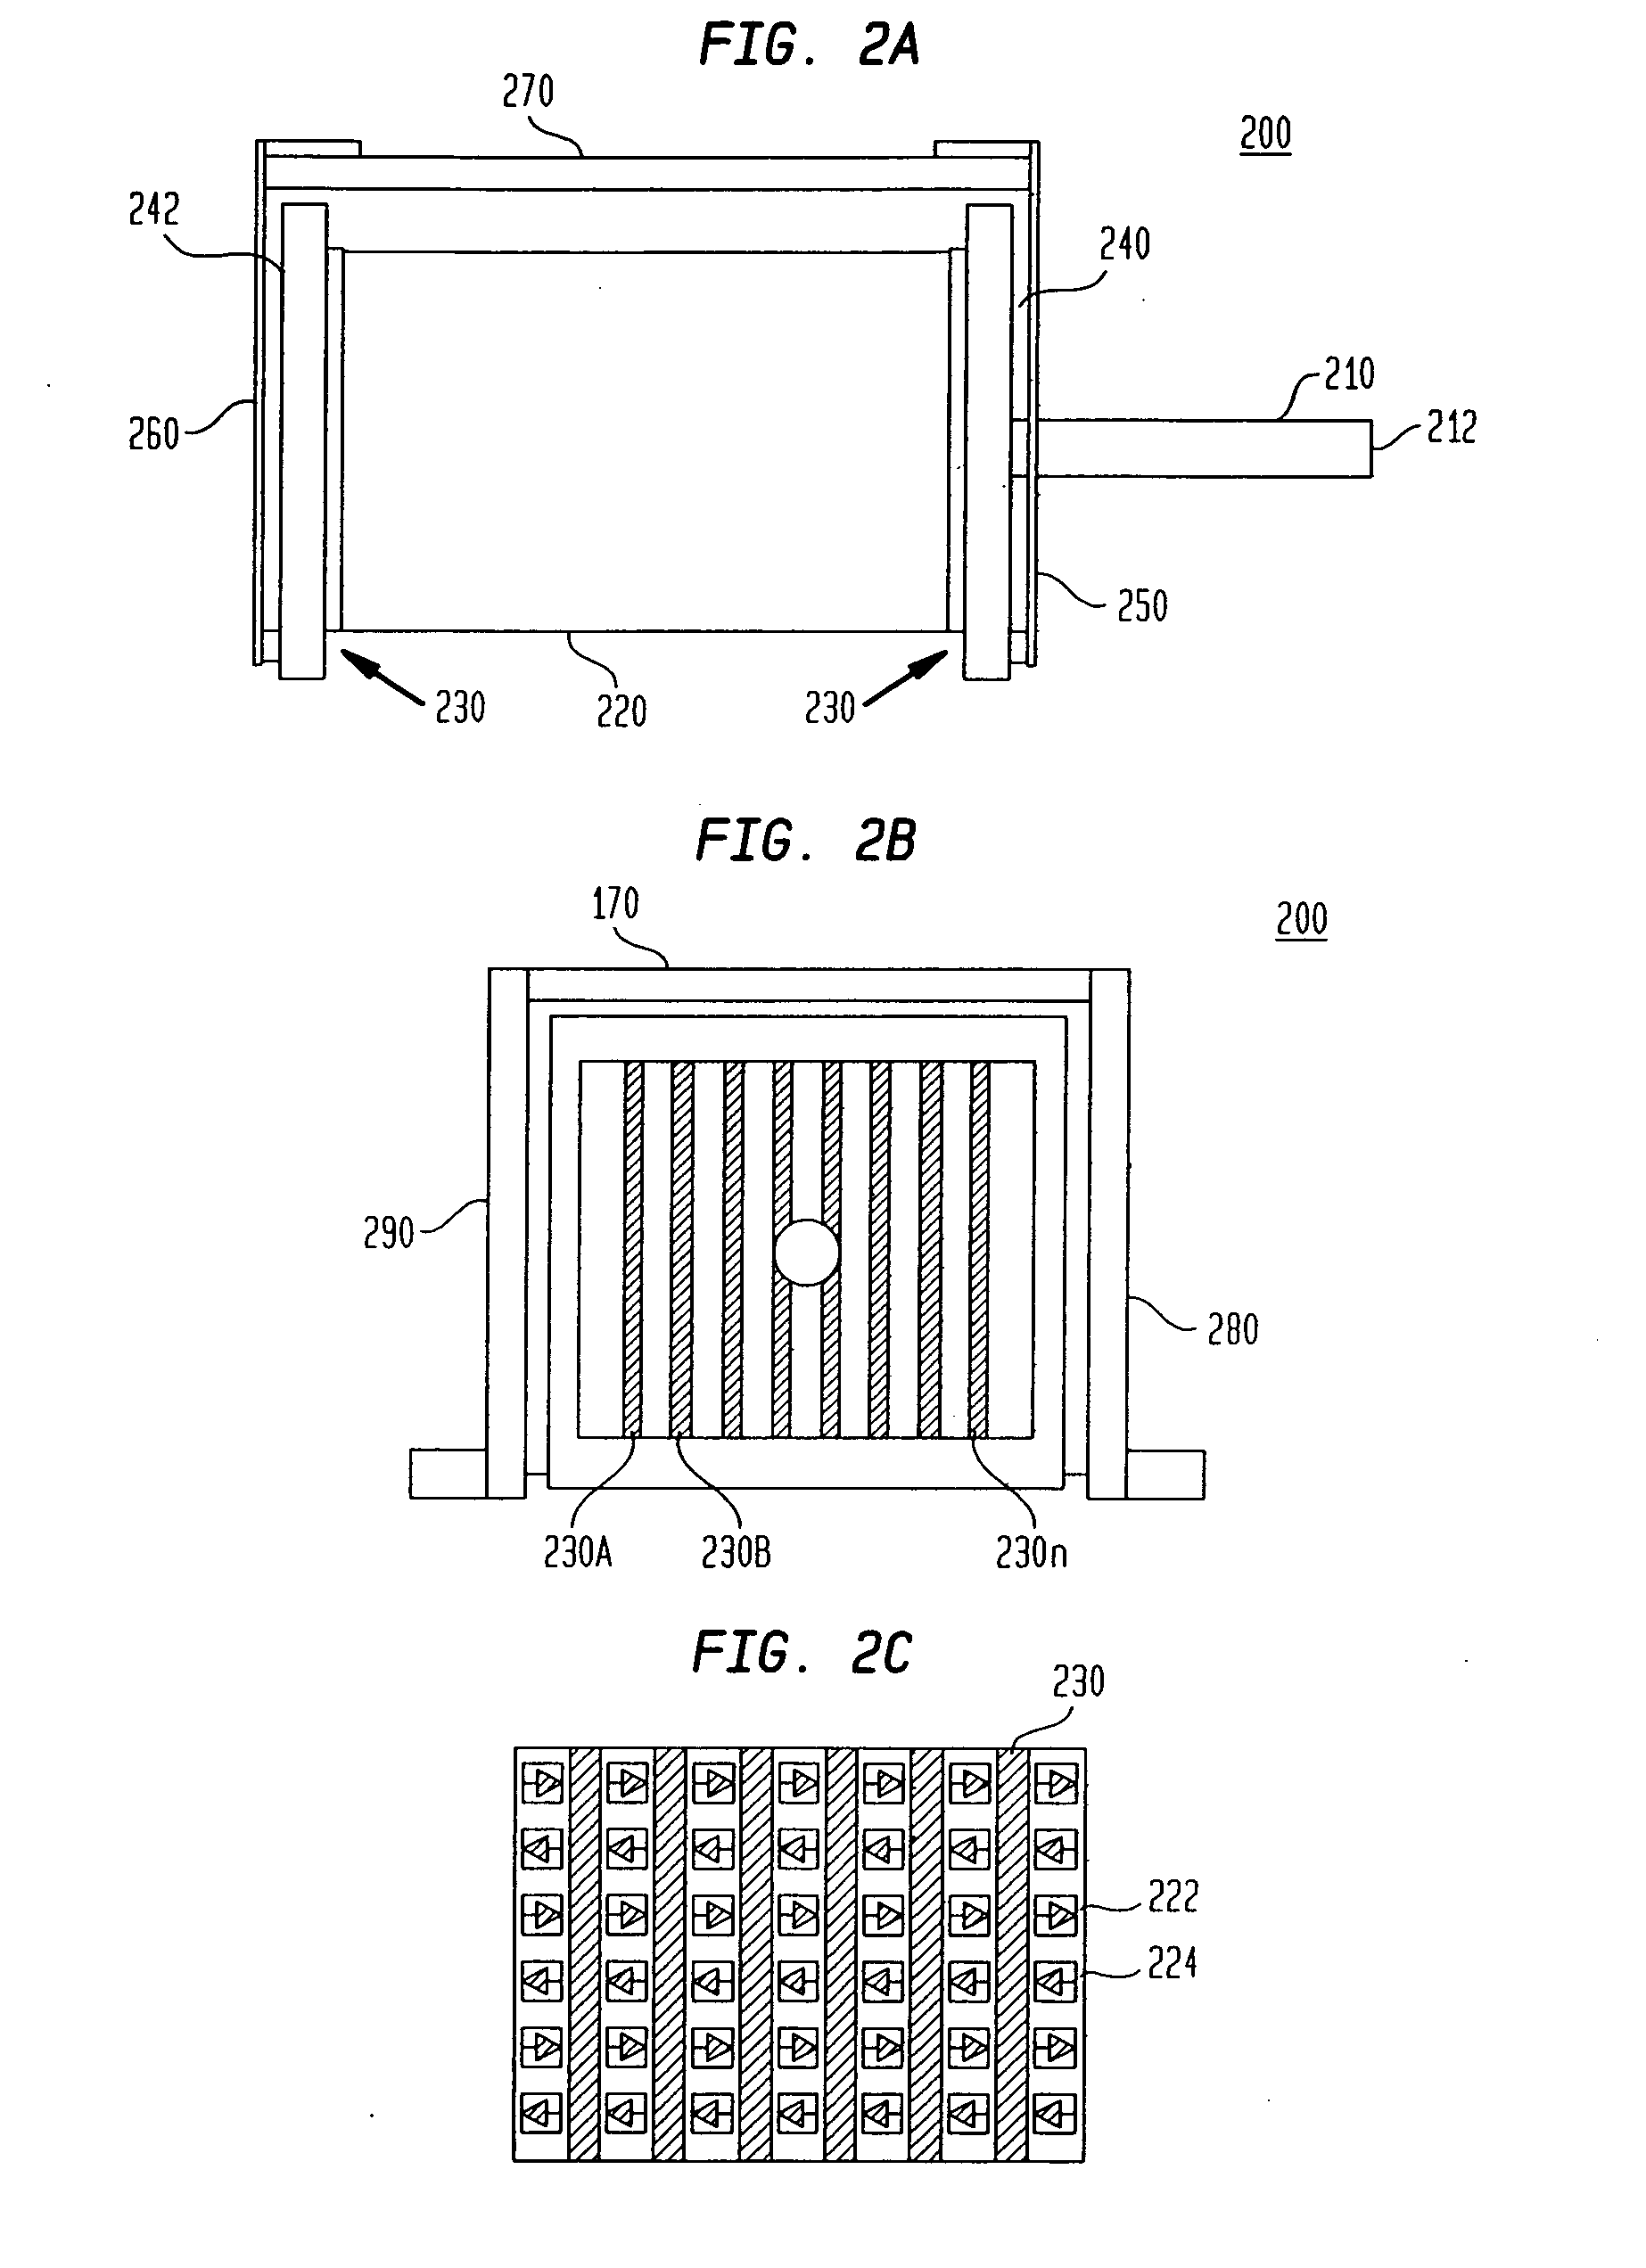 Optical element damping systems